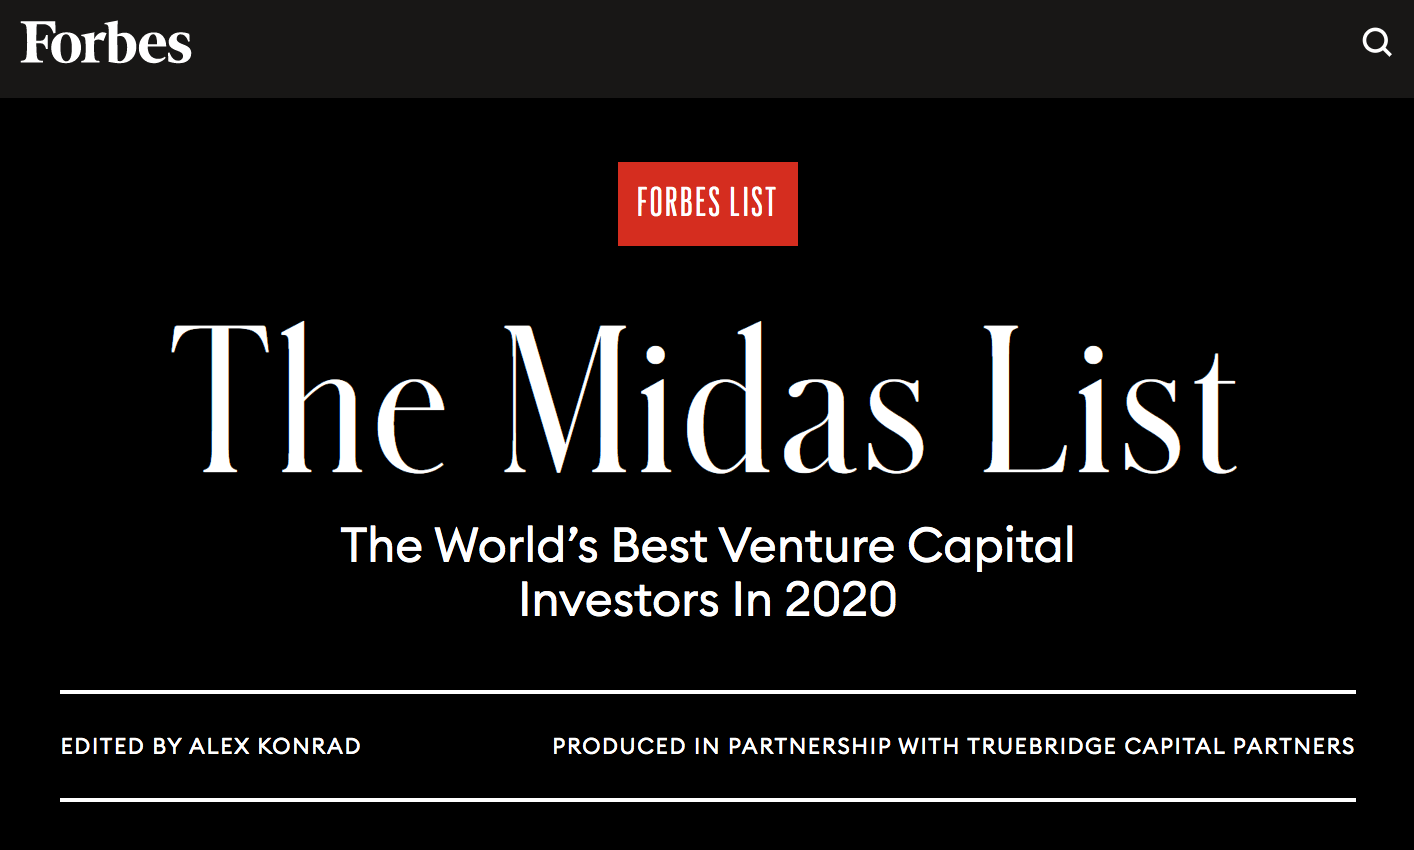 Come Watch the Midas List LIVE for Free at New New in Venture on May 27